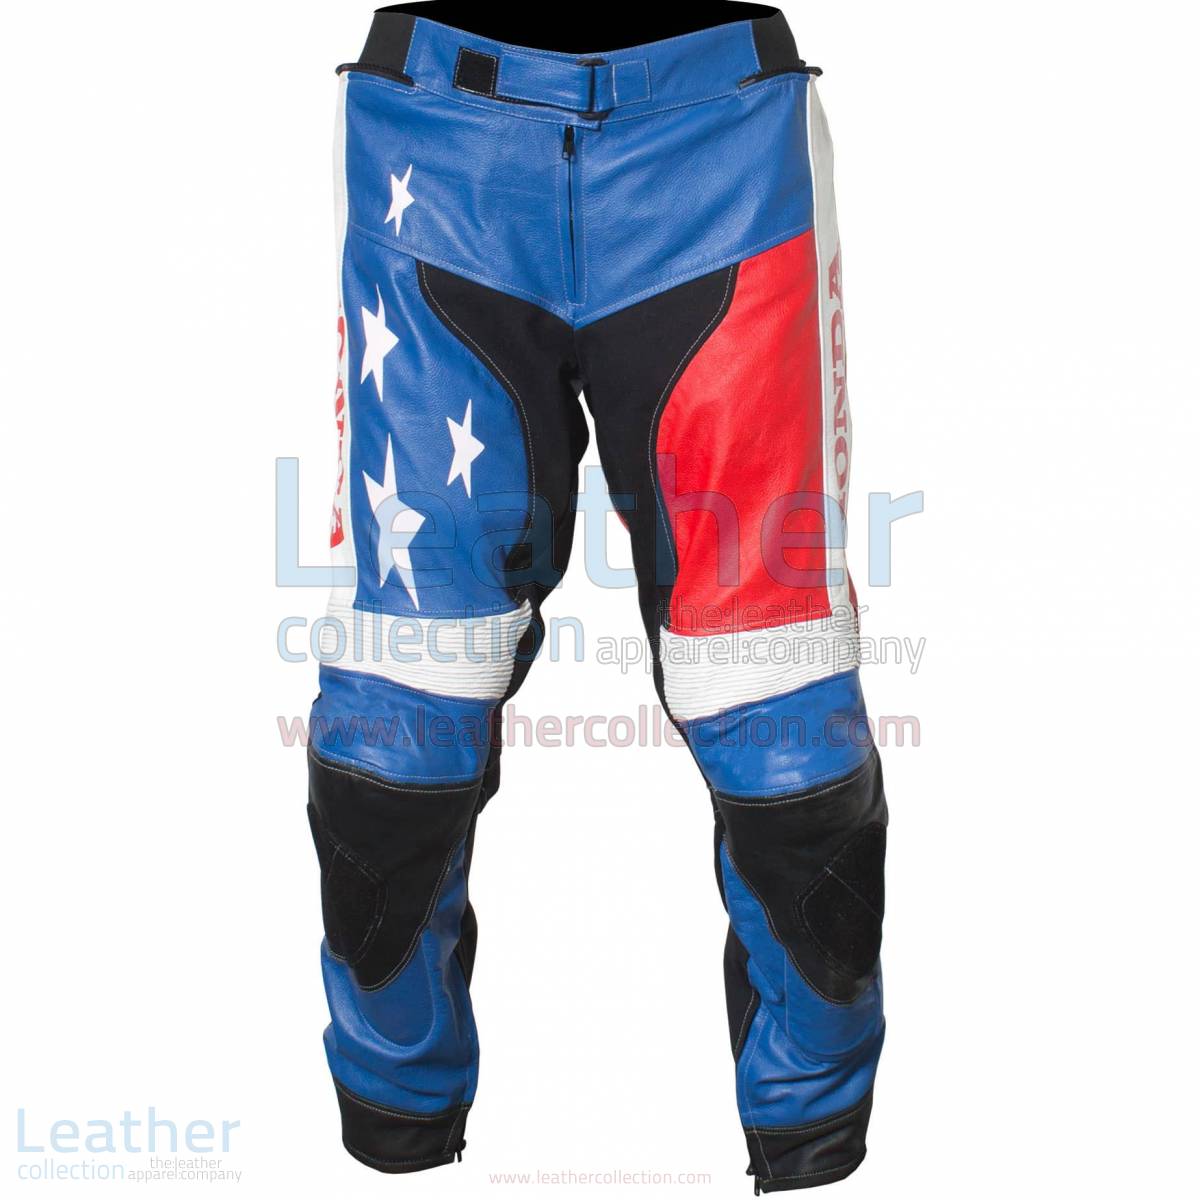 mens leather pants outfit